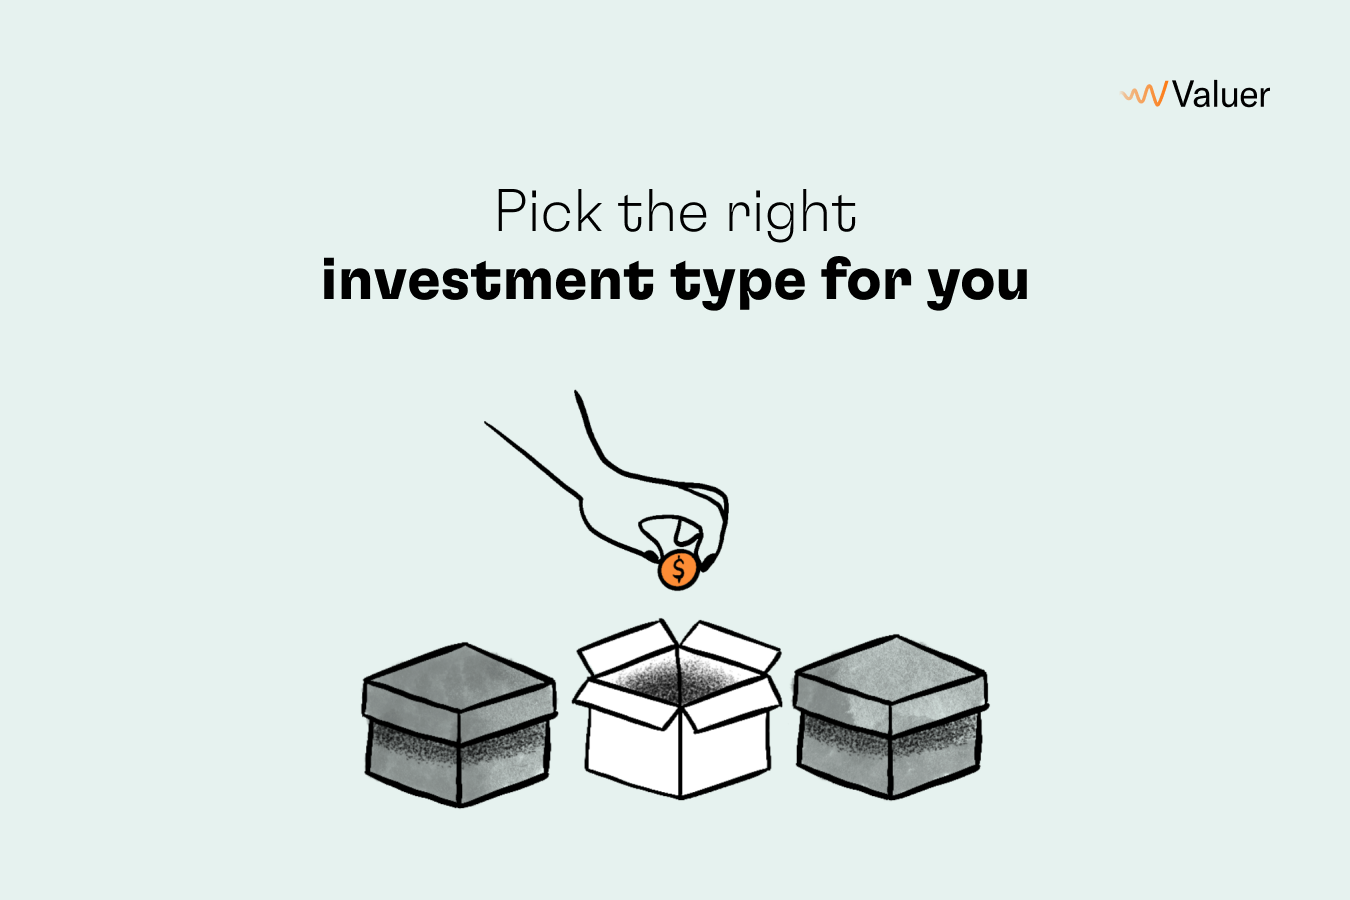 Pick the right investment type for you